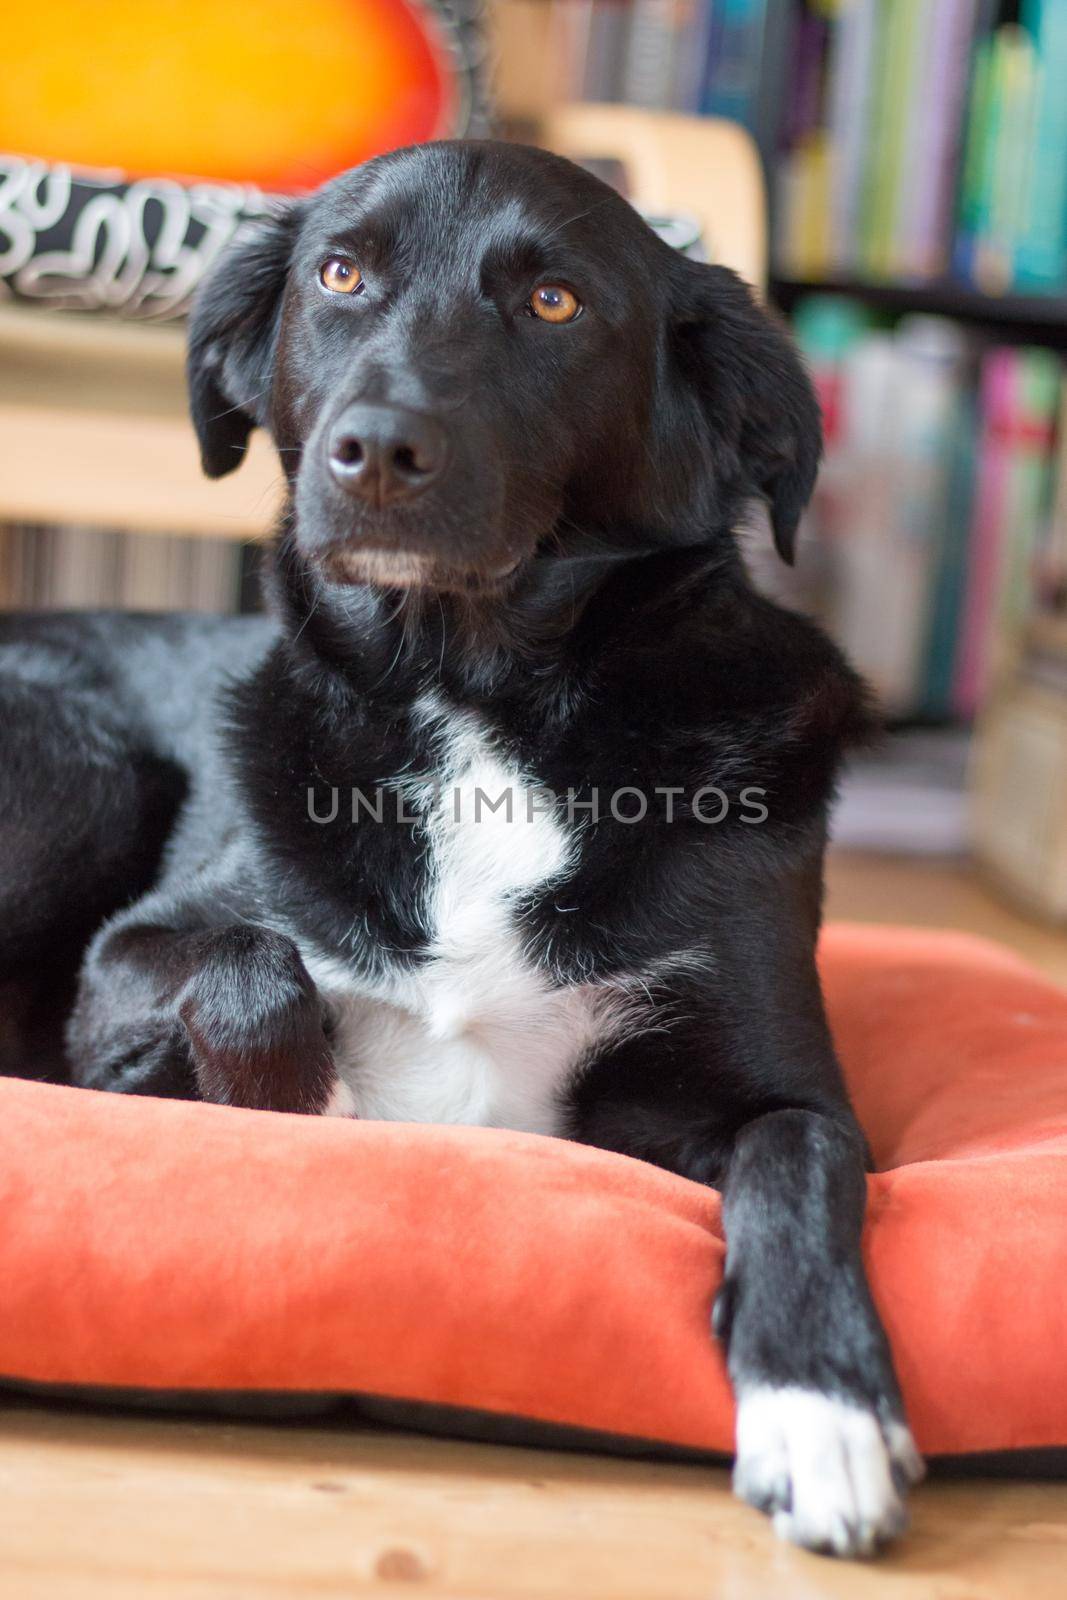 Black dog is relaxing: Labrador hybrid is lying on the wooden floor and relaxing by Daxenbichler